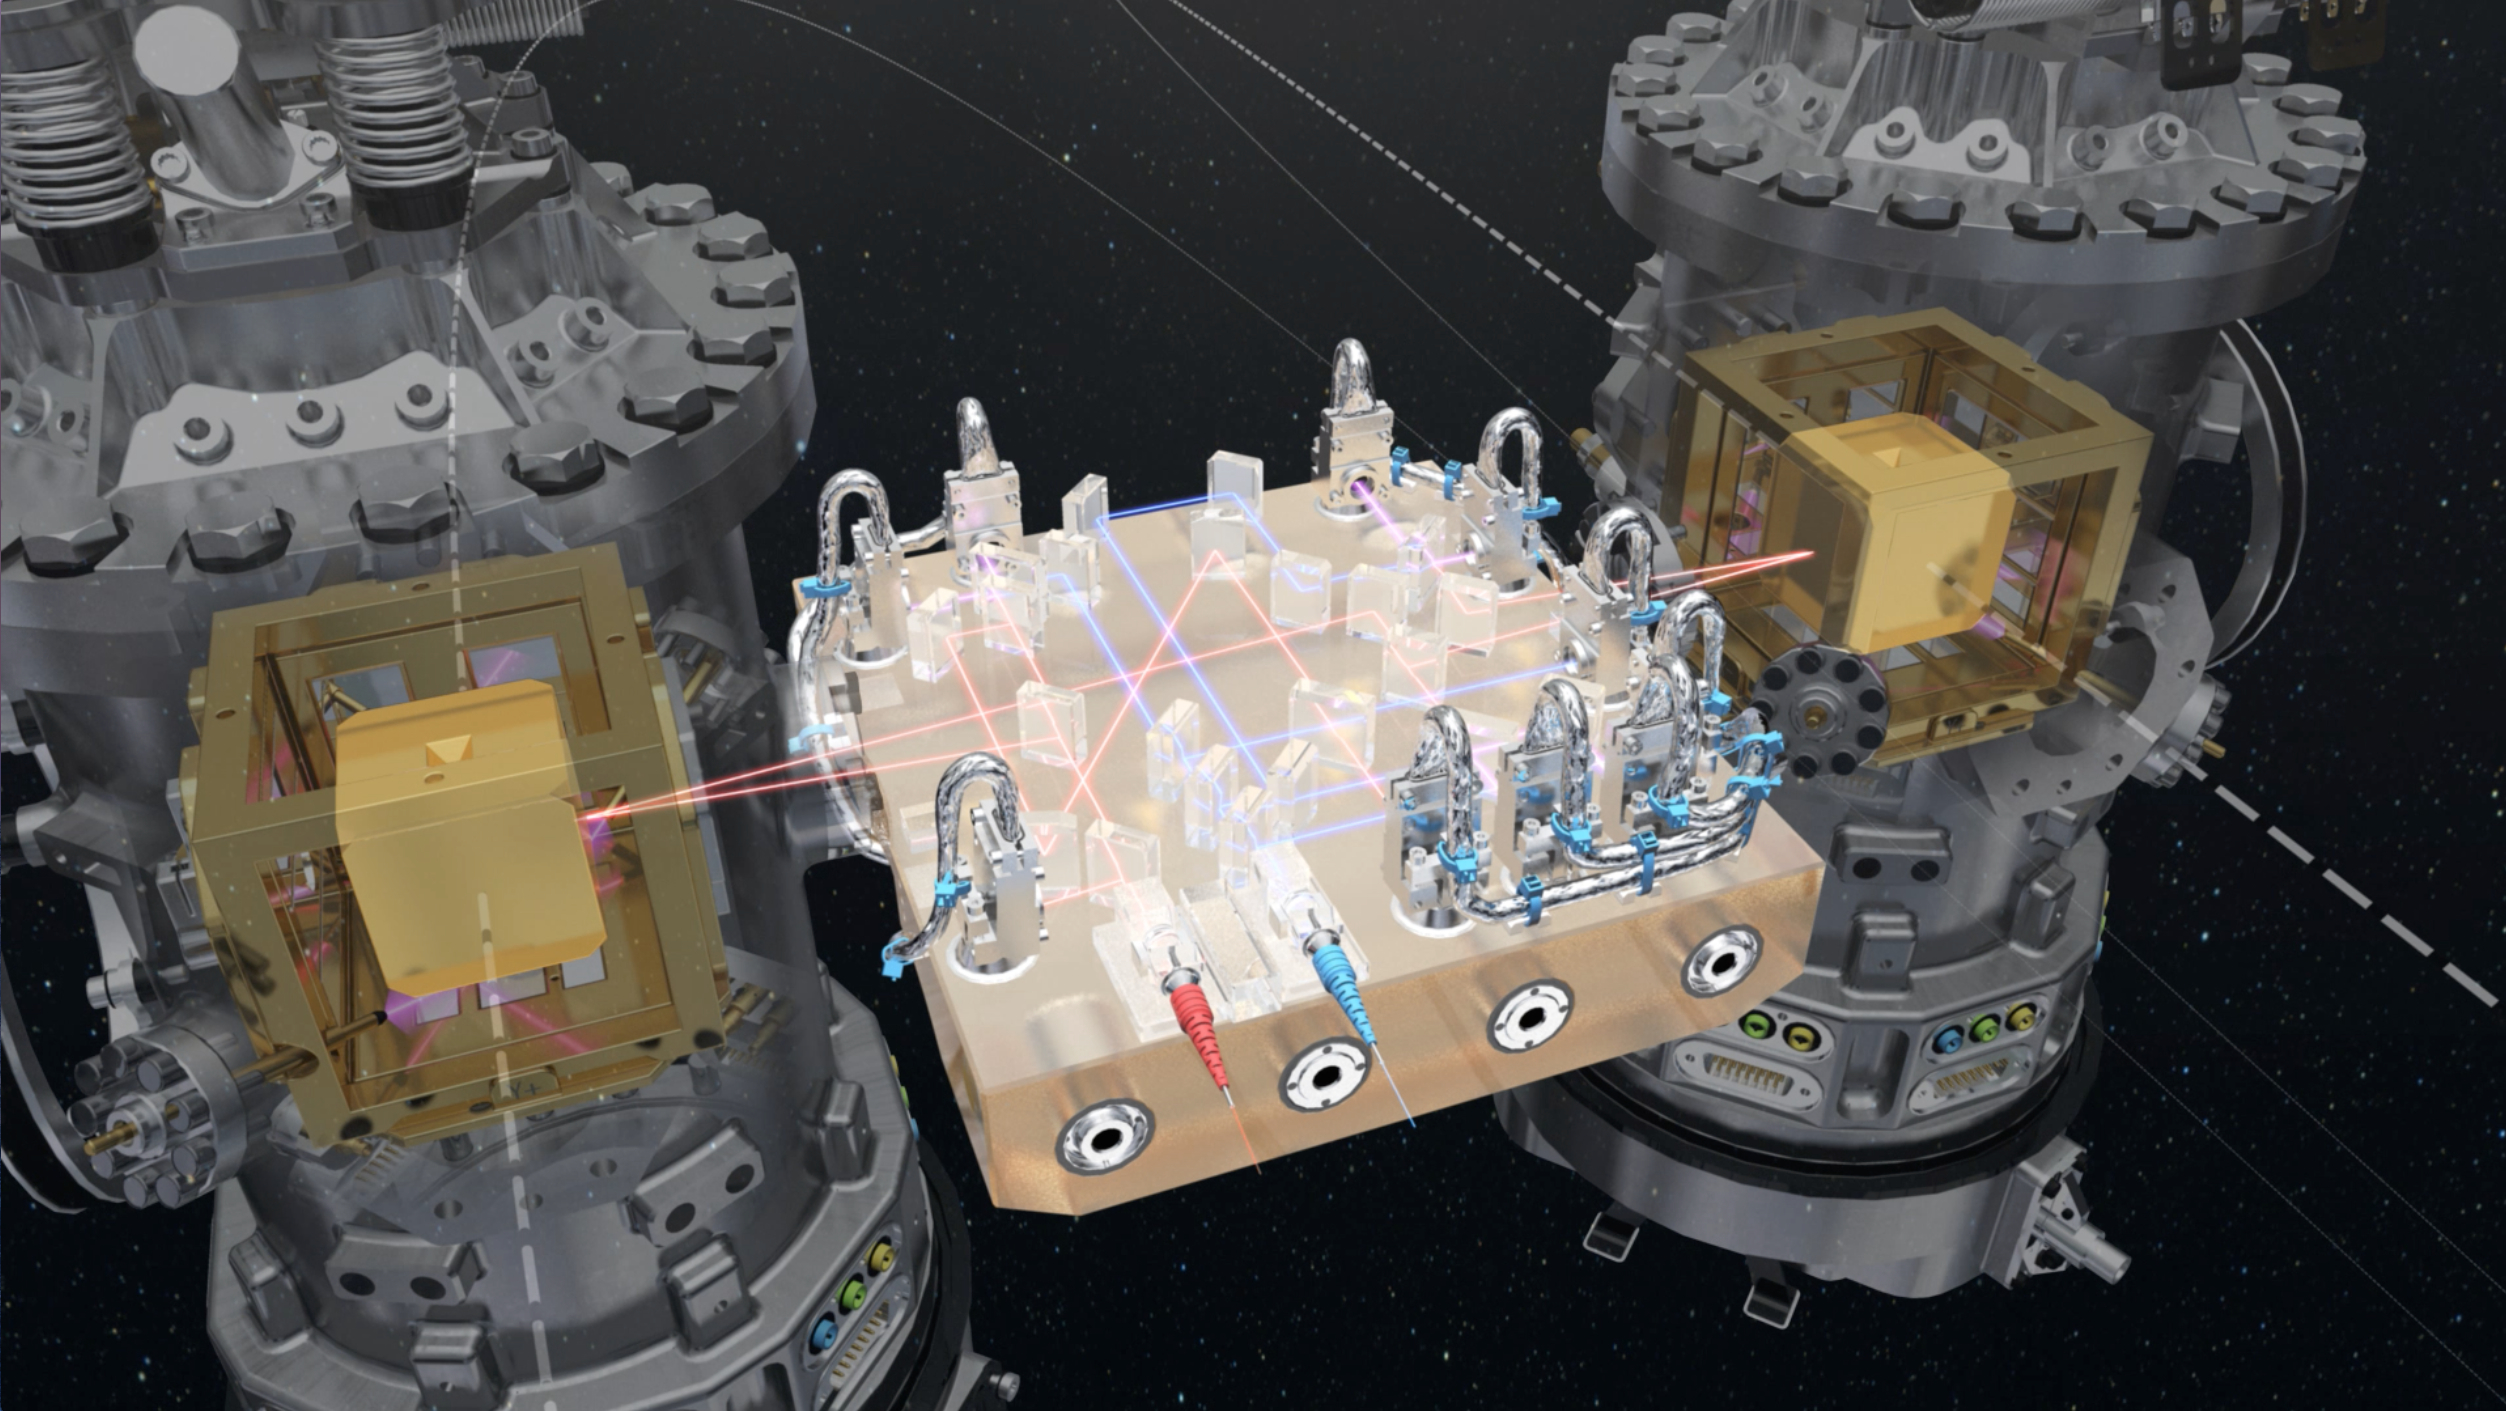 The Core Of The Lisa Pathfinder Mission Designed To Test Technologies